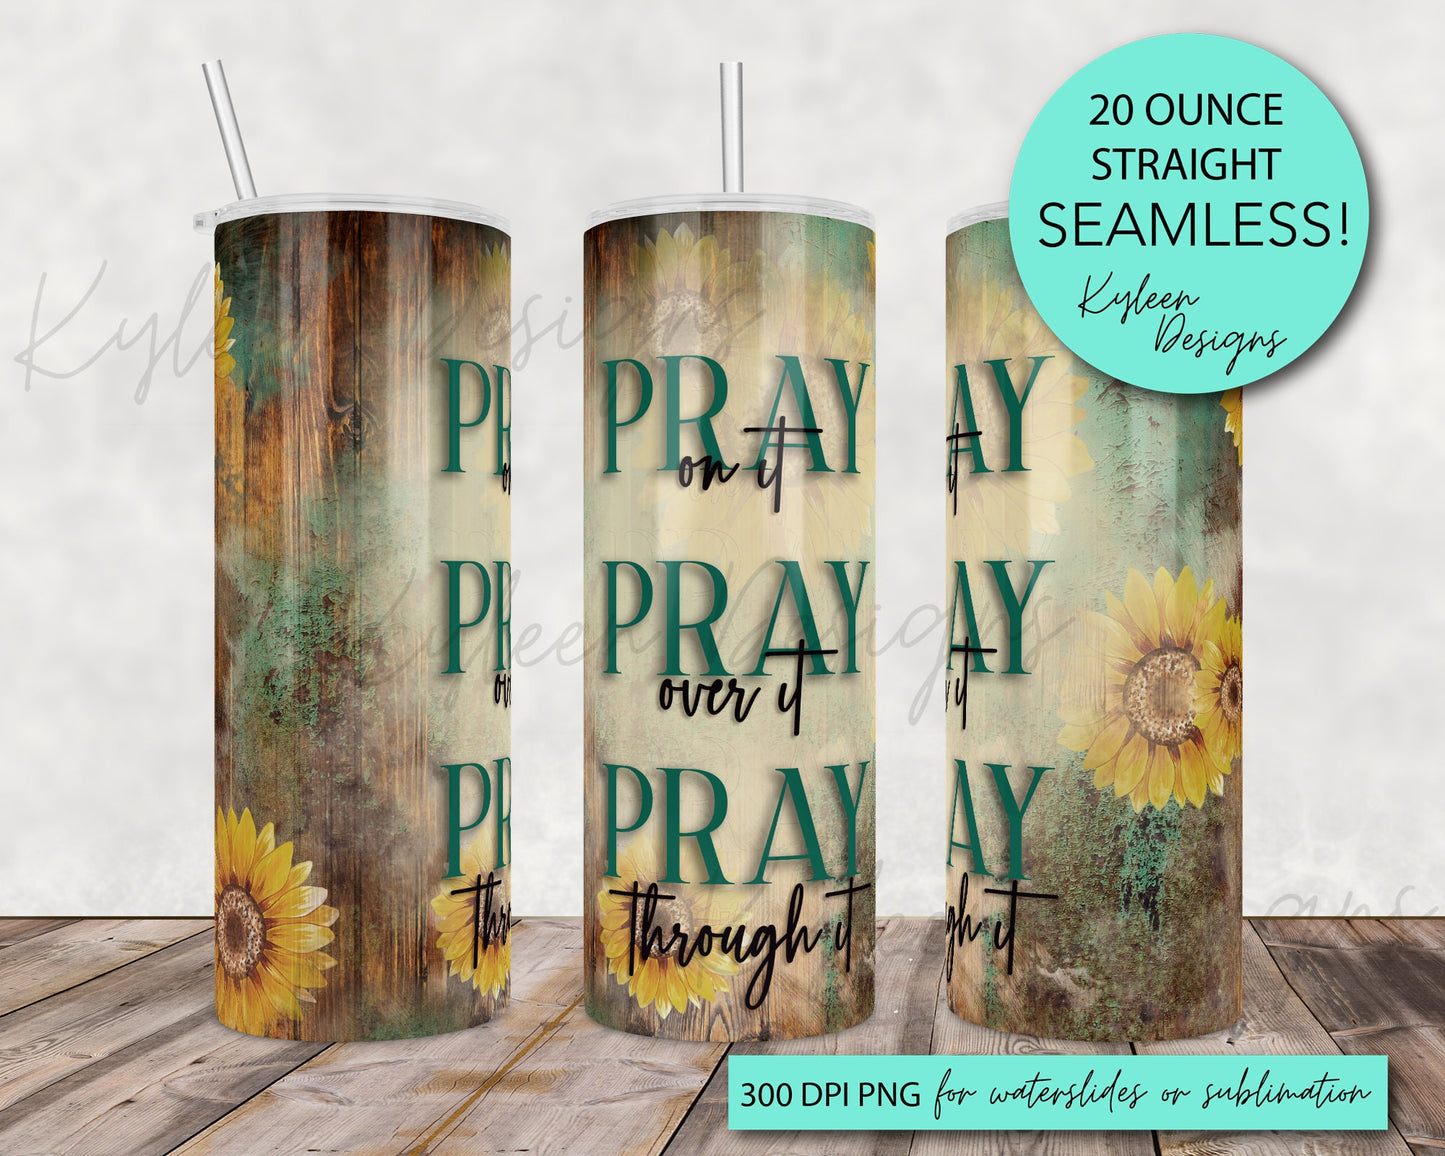 SEAMLESS pray on it, over it, through it 20 ounce wrap for sublimation, waterslide High res PNG digital file- Straight only